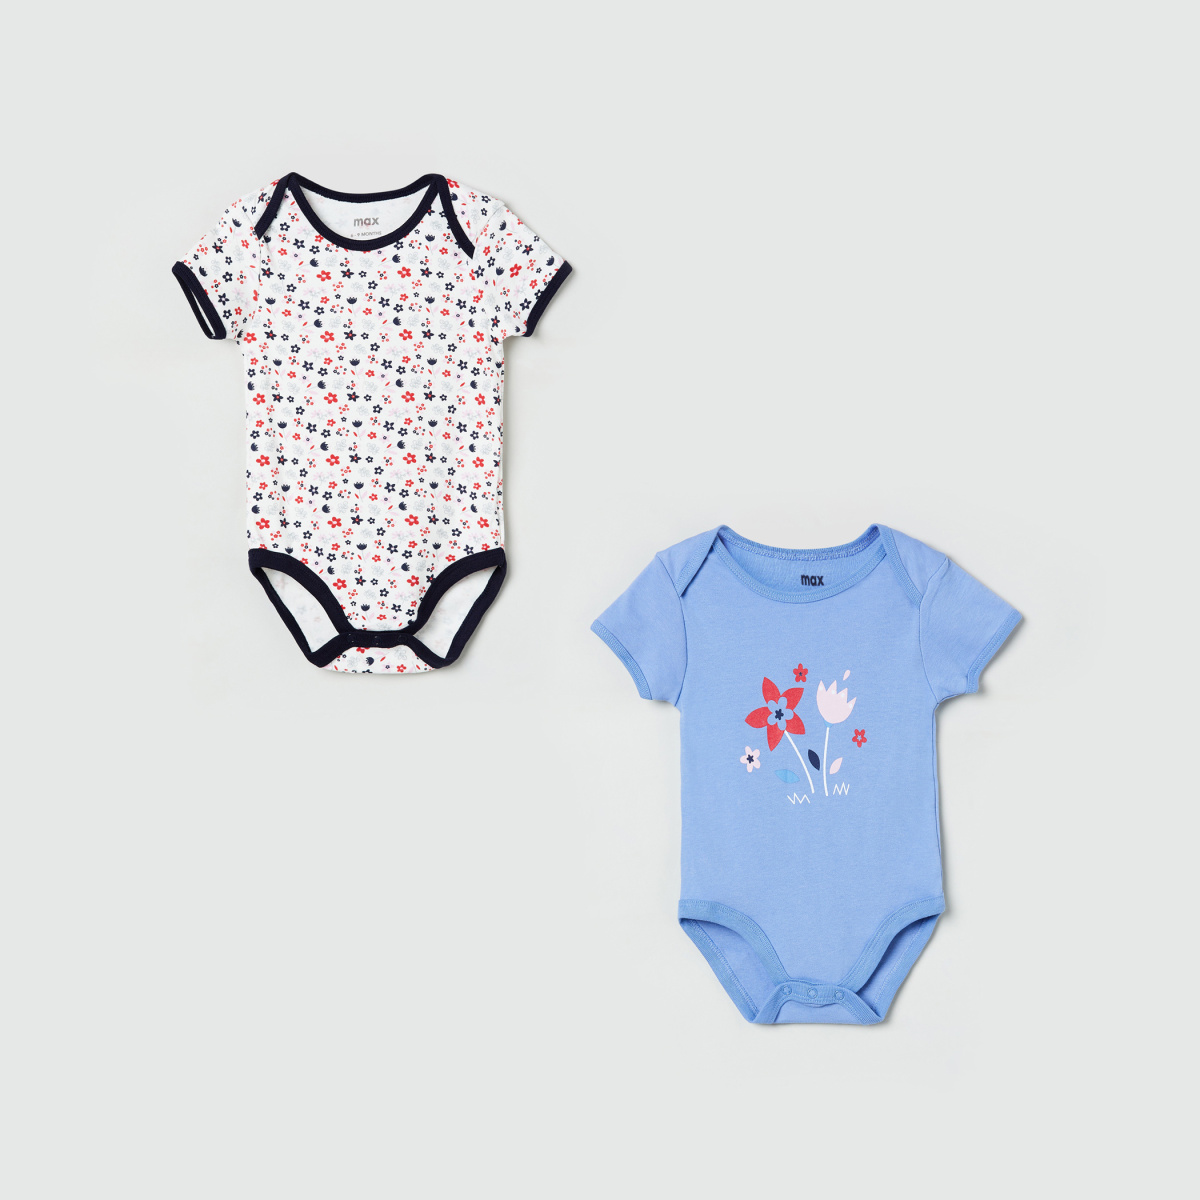 MAX Printed Knitted Rompers - Set of 2